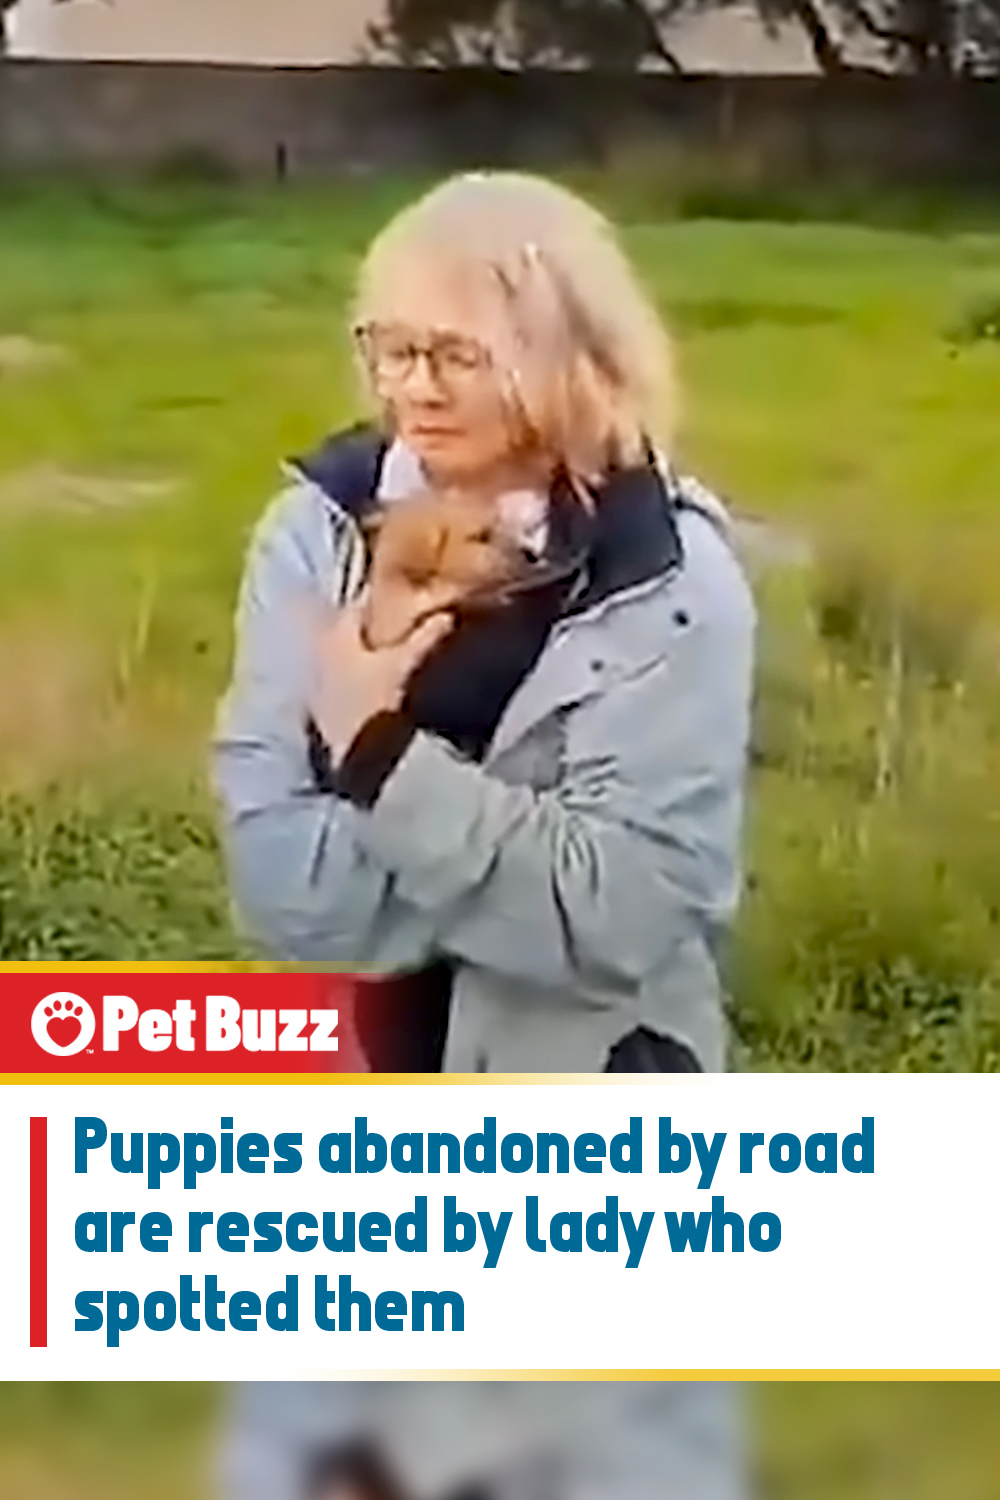 Puppies abandoned by road are rescued by lady who spotted them